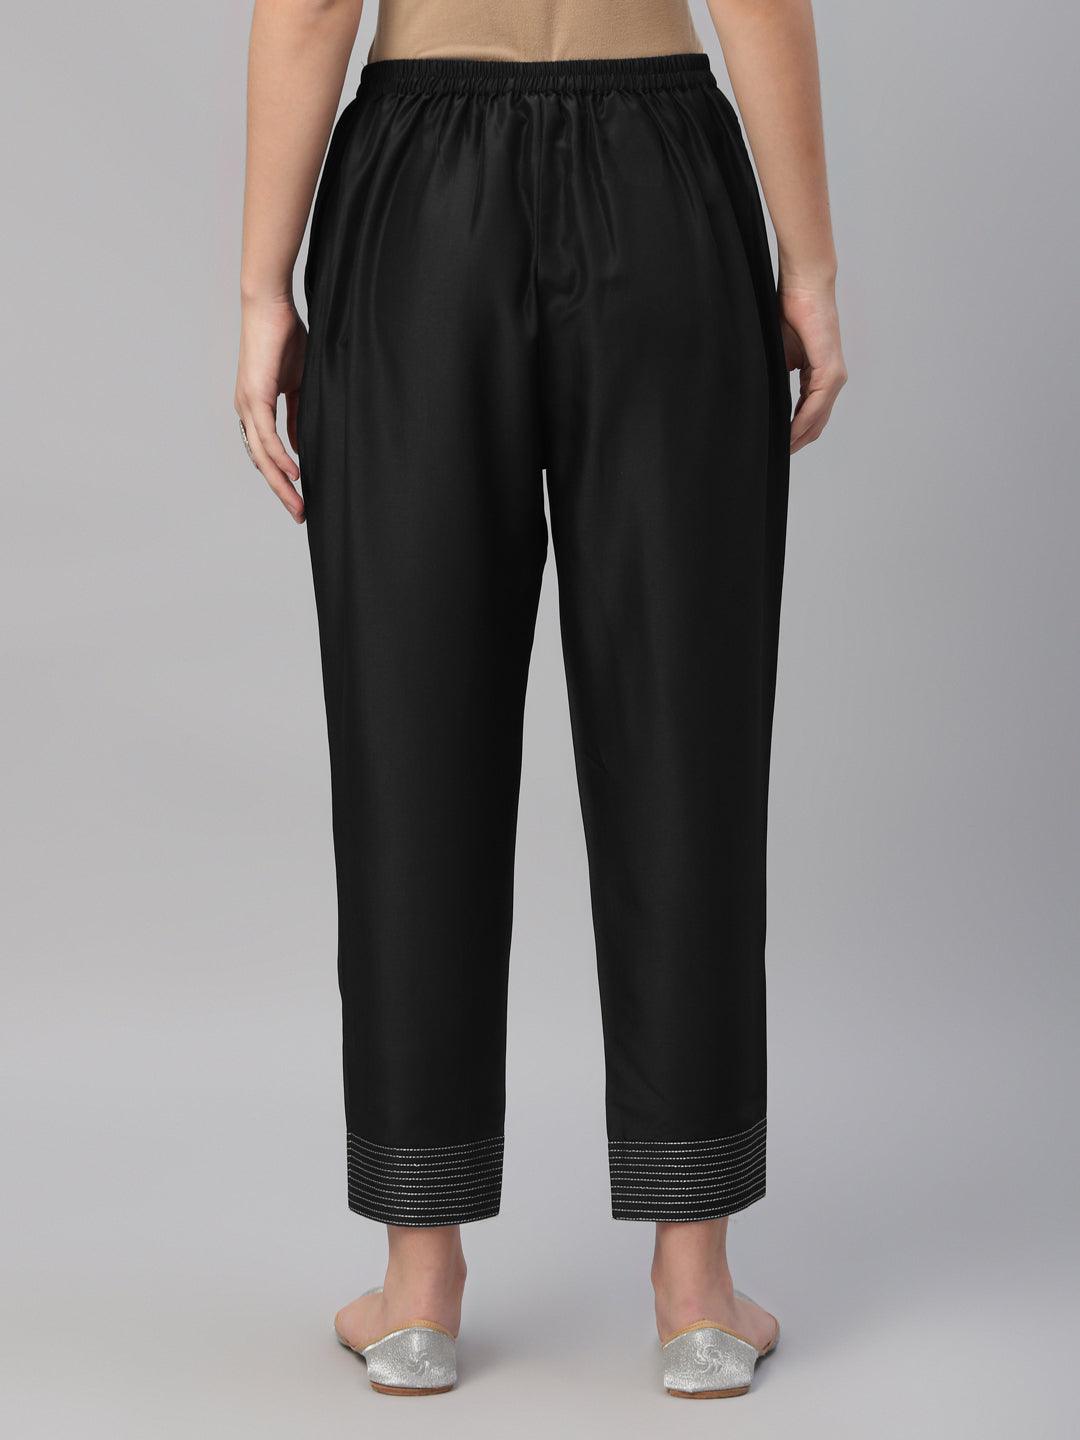 Black Solid Crepe Trousers - Libas